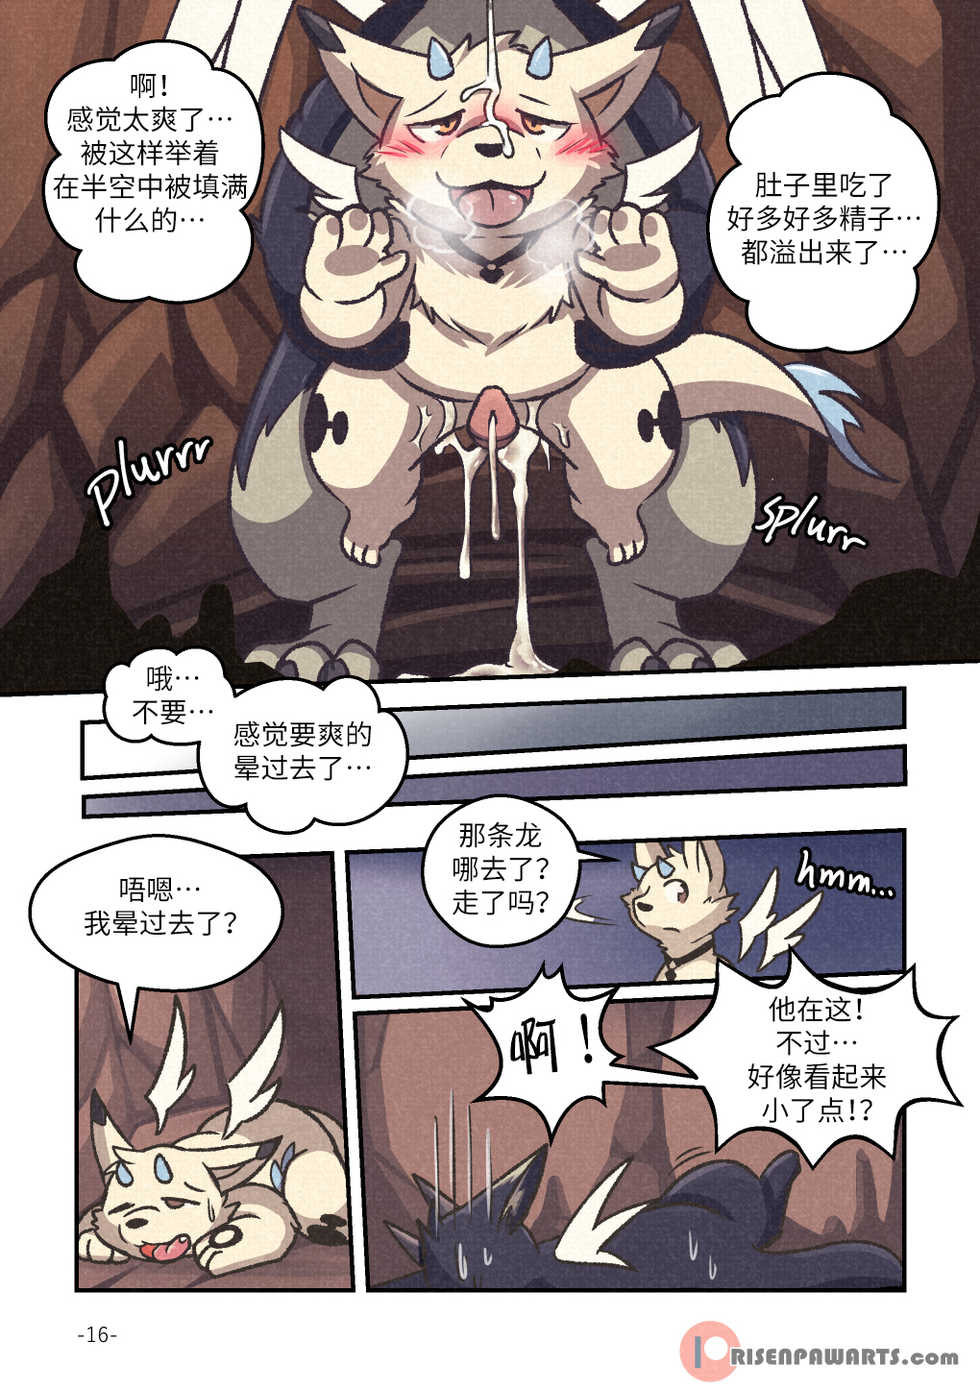 [Risenpaw] Out of Control [Chinese] [悬赏大厅×不可视汉化组] - Page 15